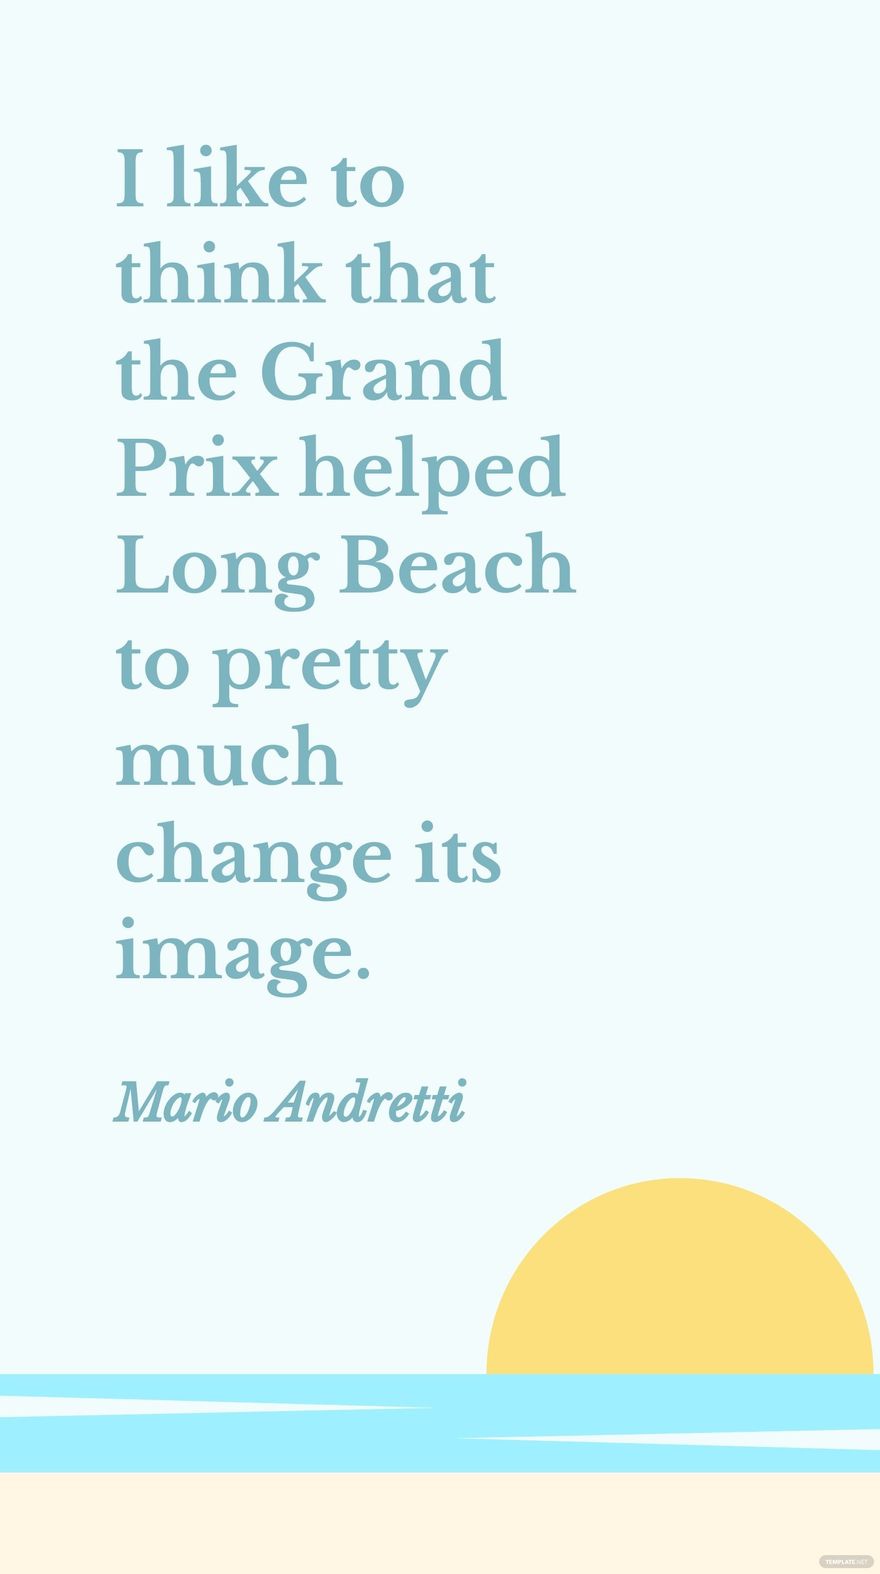 Mario Andretti - I like to think that the Grand Prix helped Long Beach to pretty much change its image. in JPG